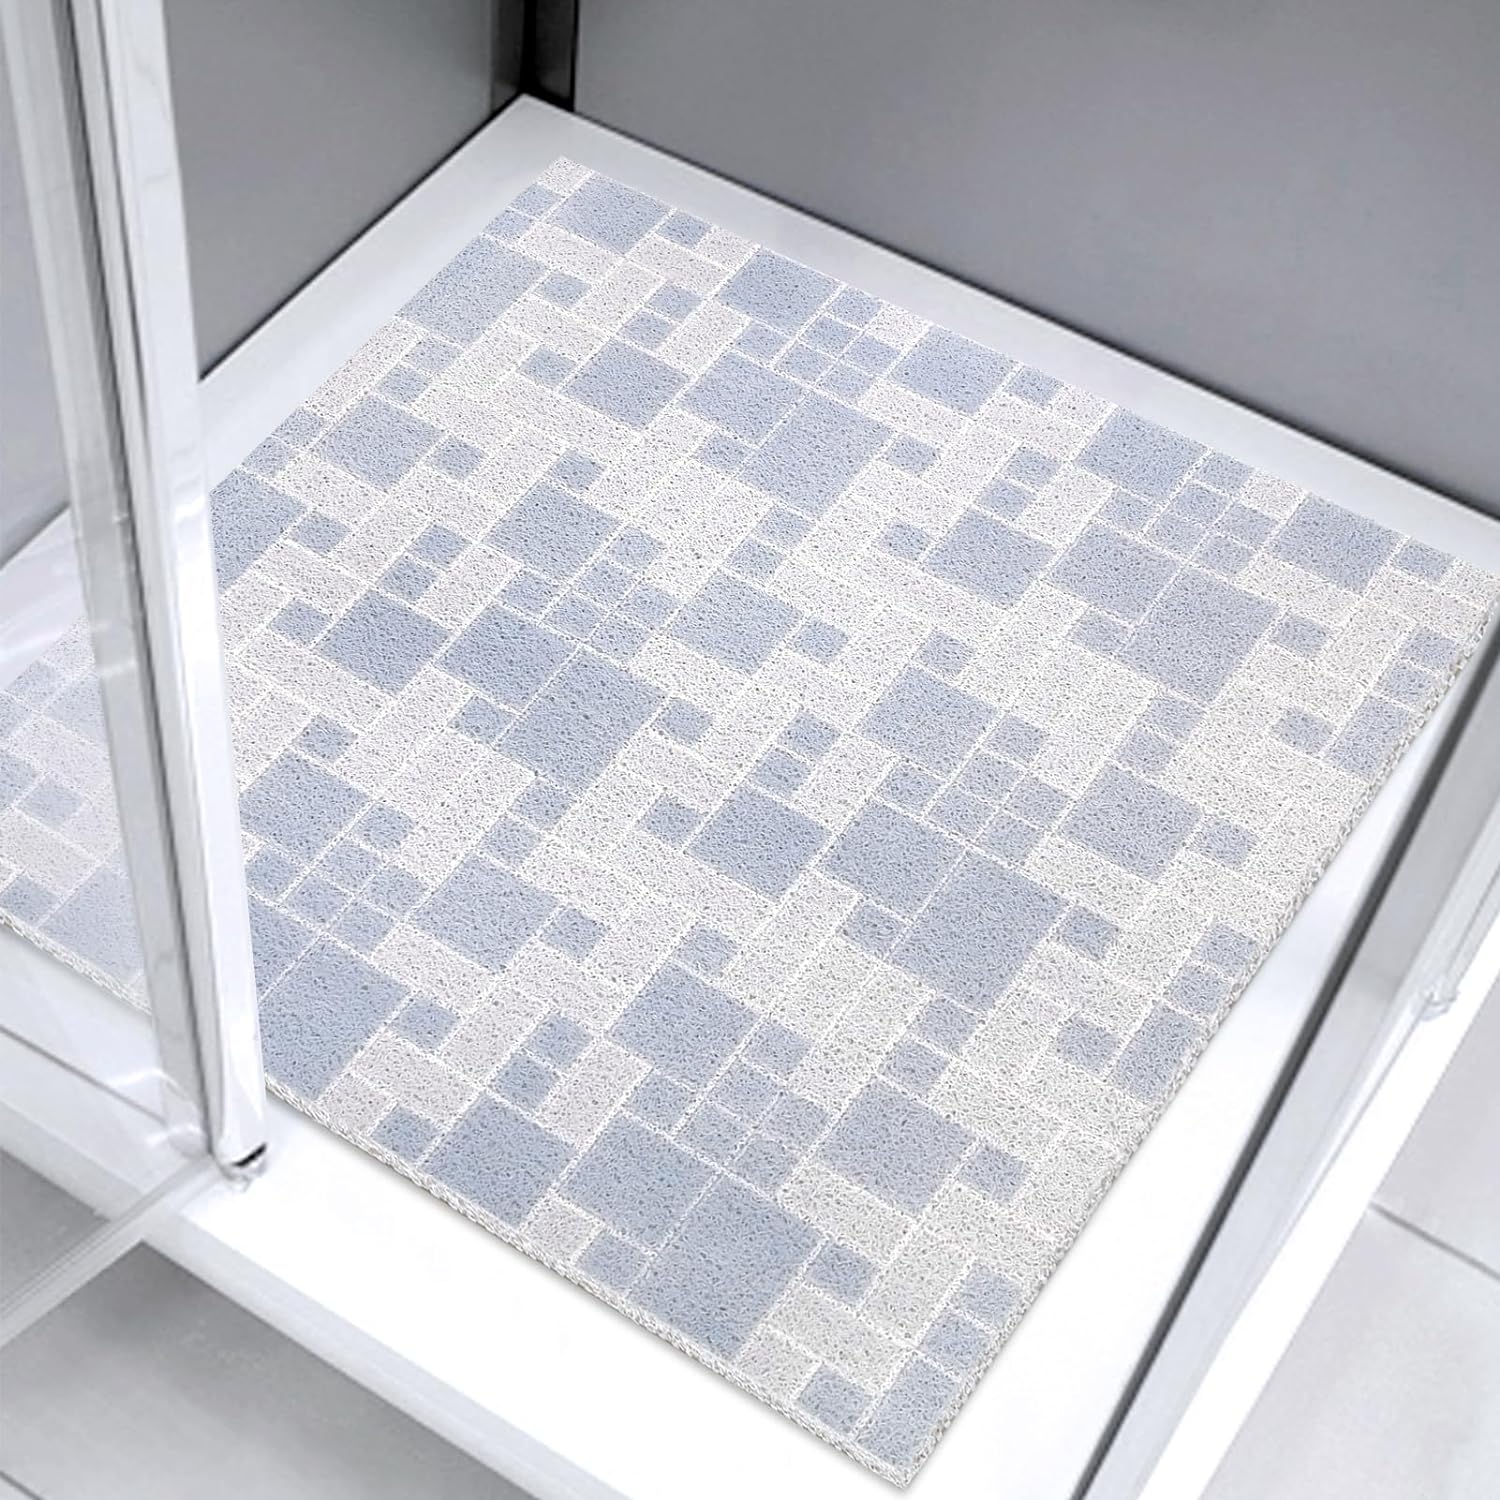 Improve bathroom safety and comfort: top shower mat recommendations